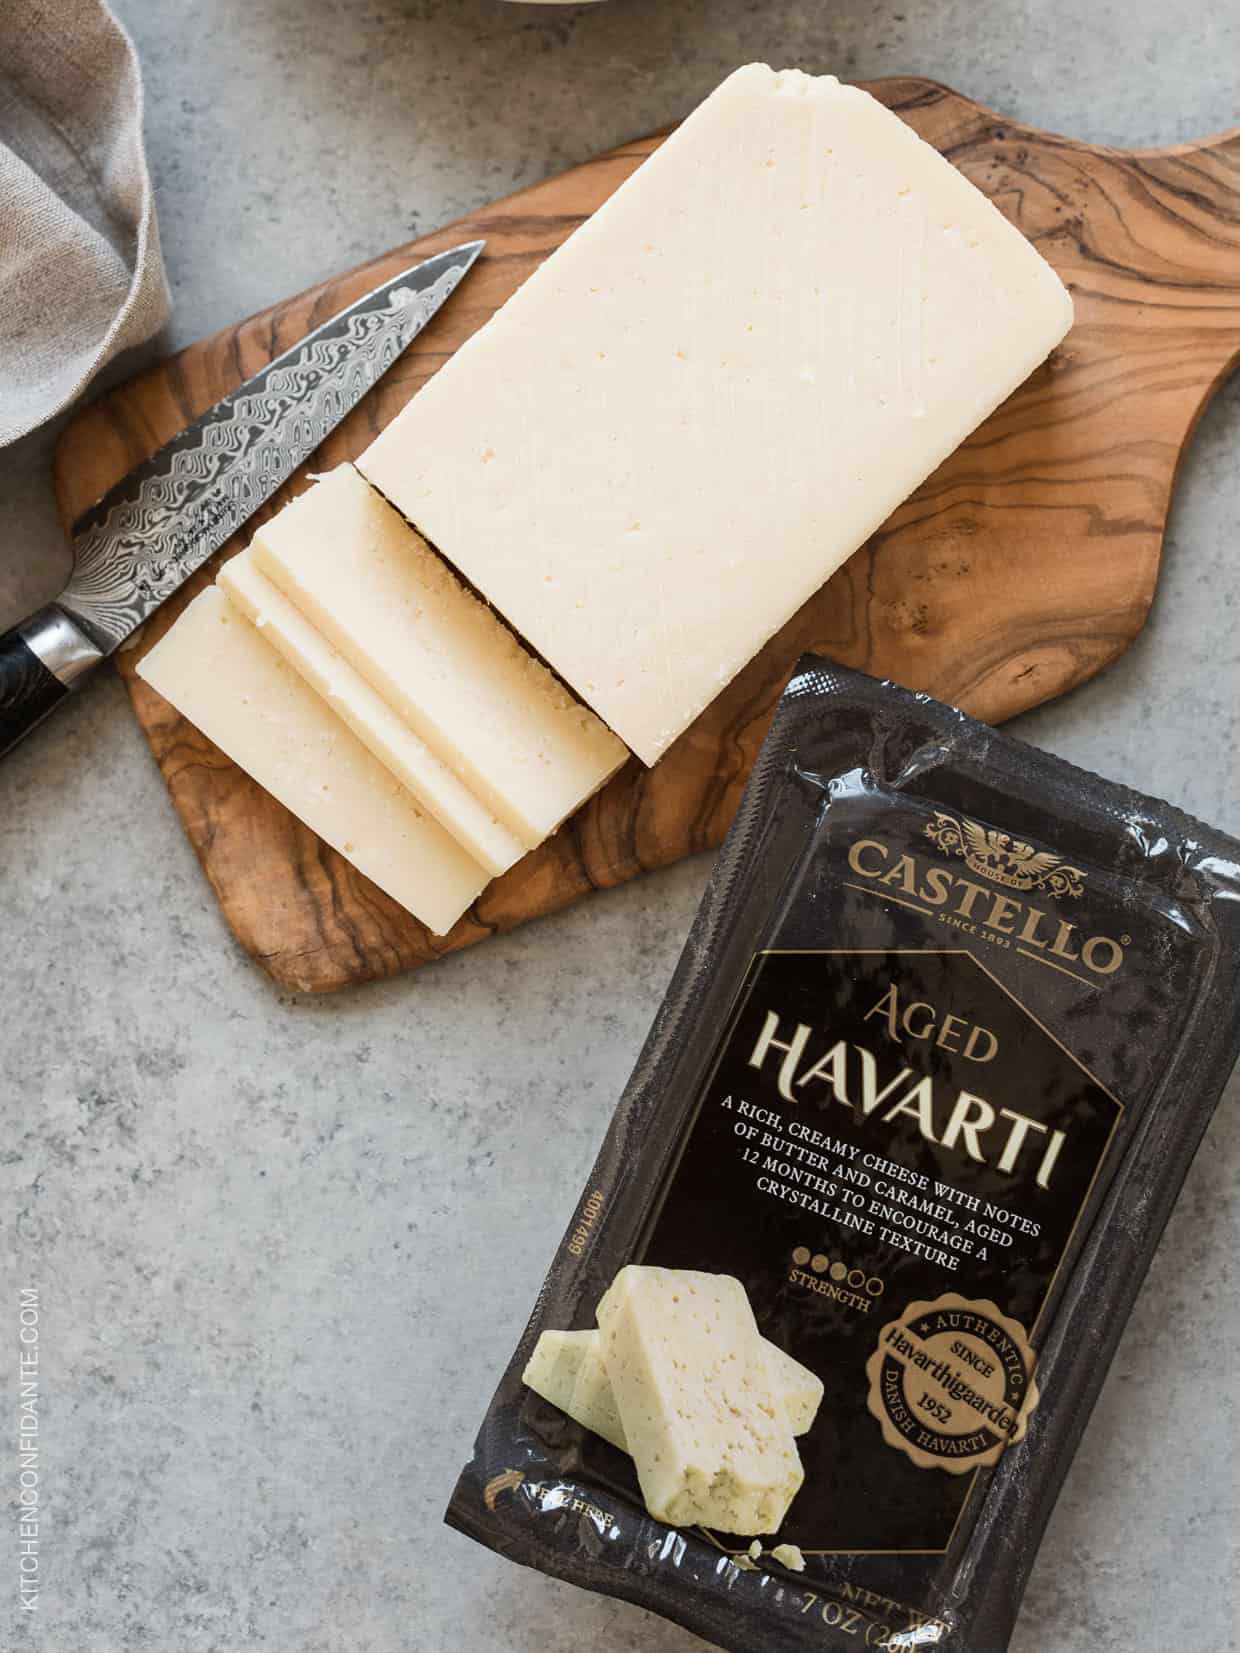 Sliced Havarti cheese on a cheese board.